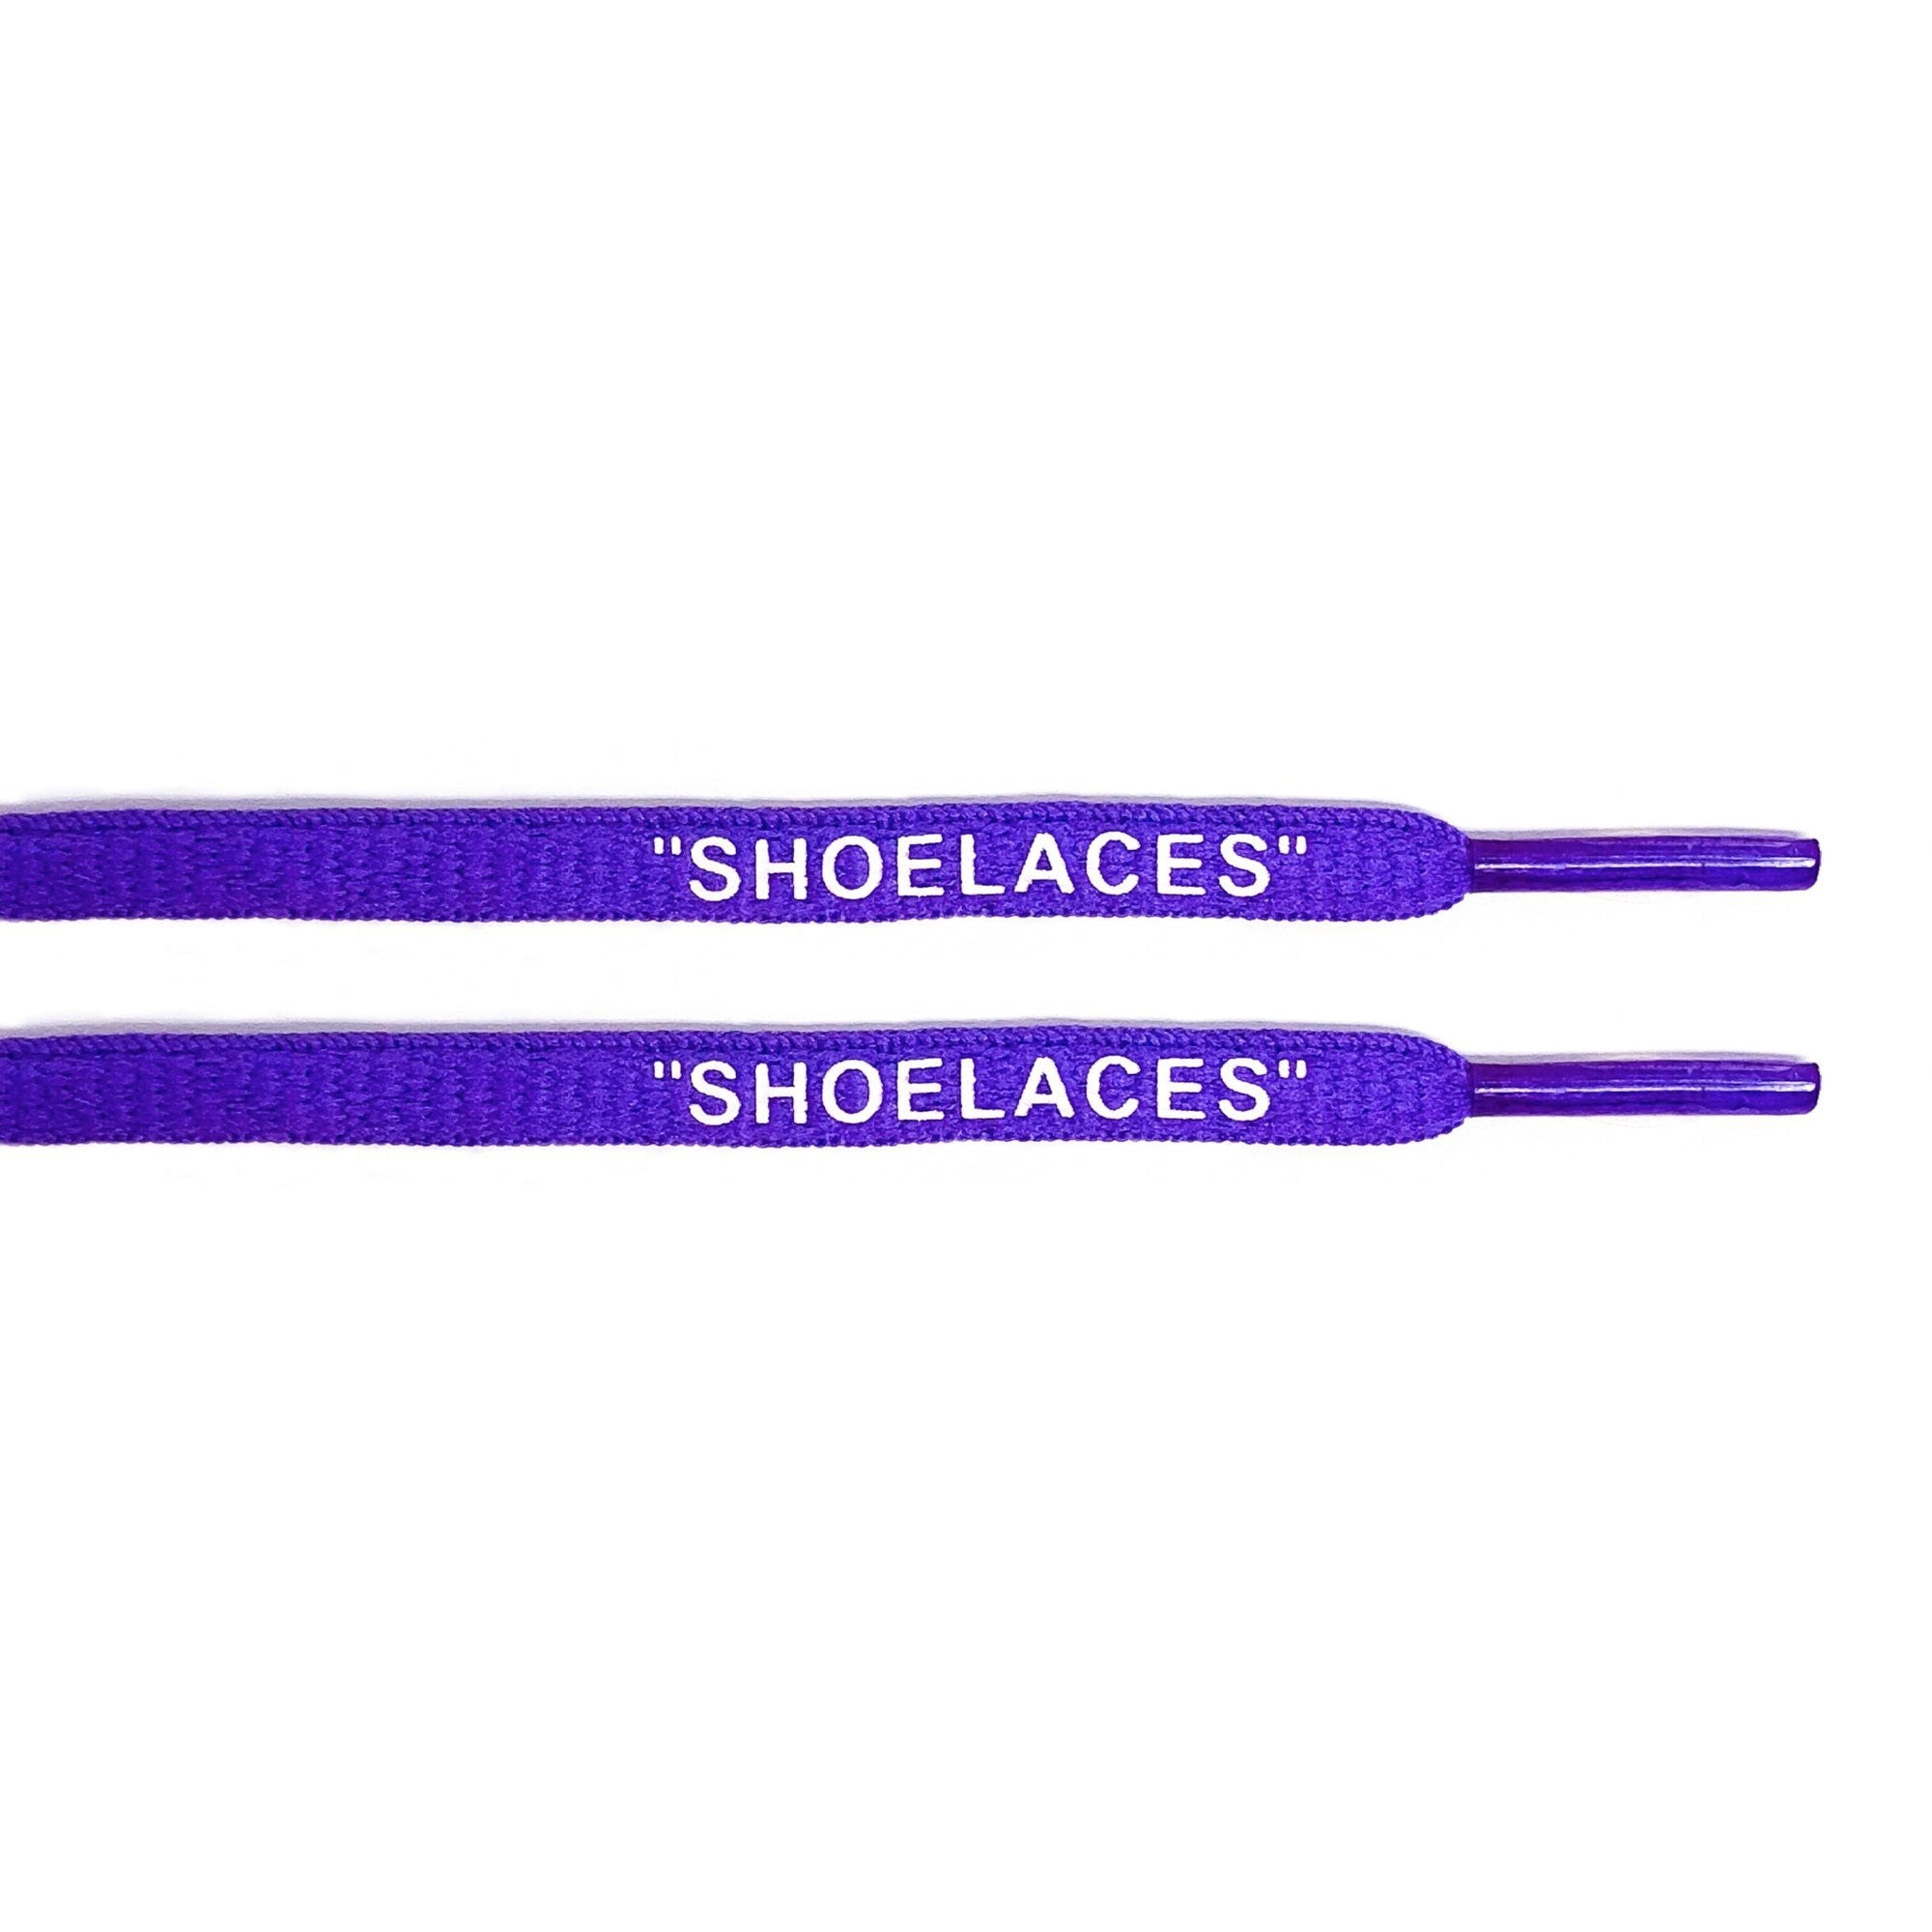 Oval - Purple "SHOELACES" inspired by OFF-WHITE x Nike - Purple - Presto and Vapormax - Oval Laces - LaceSpace